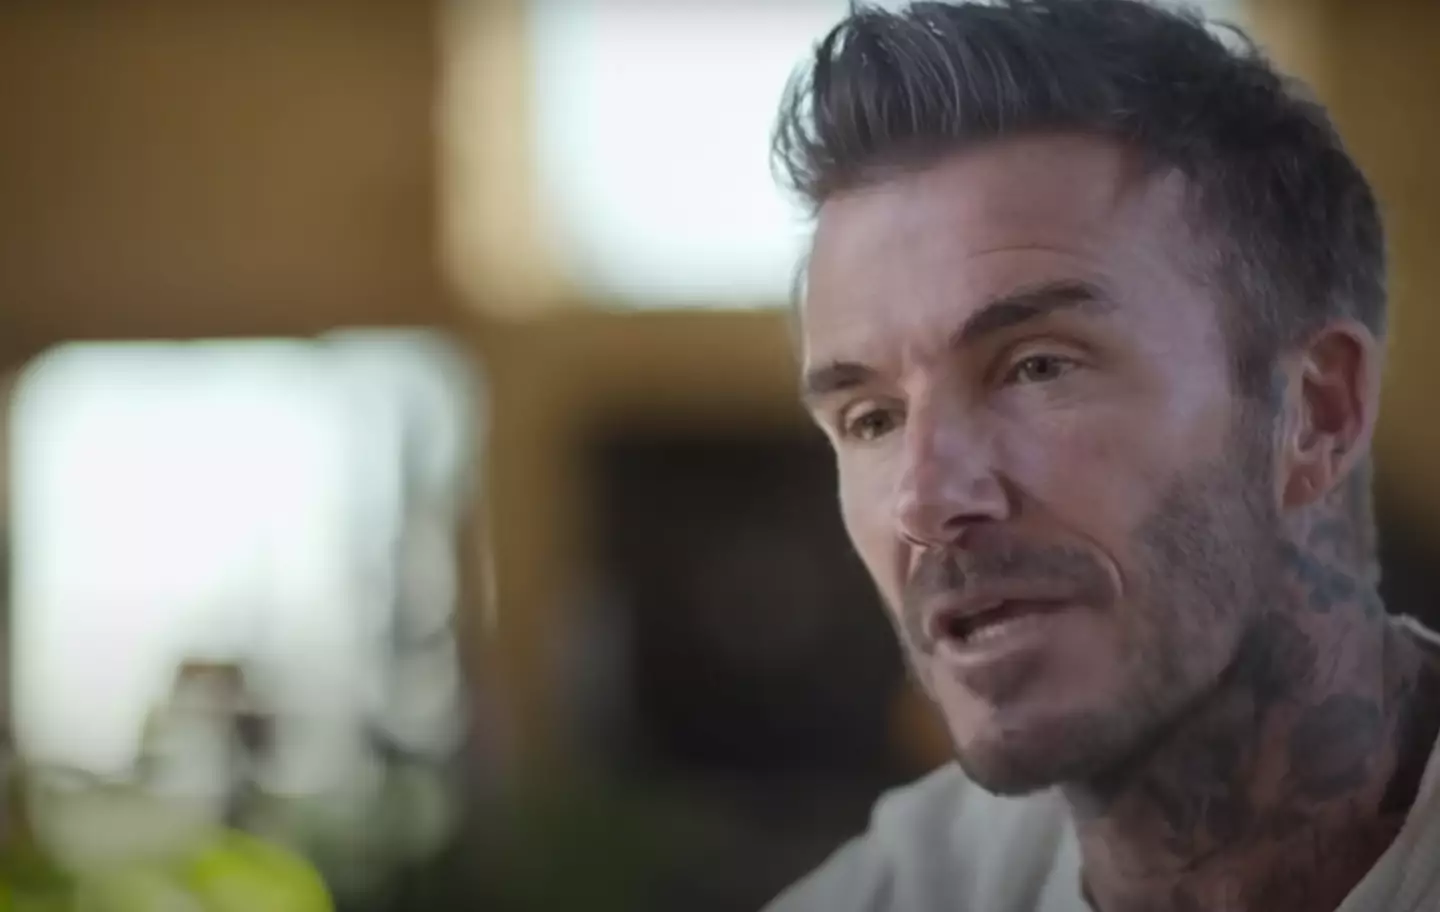 David Beckham spoke about 'tabloid stories' during the documentary.